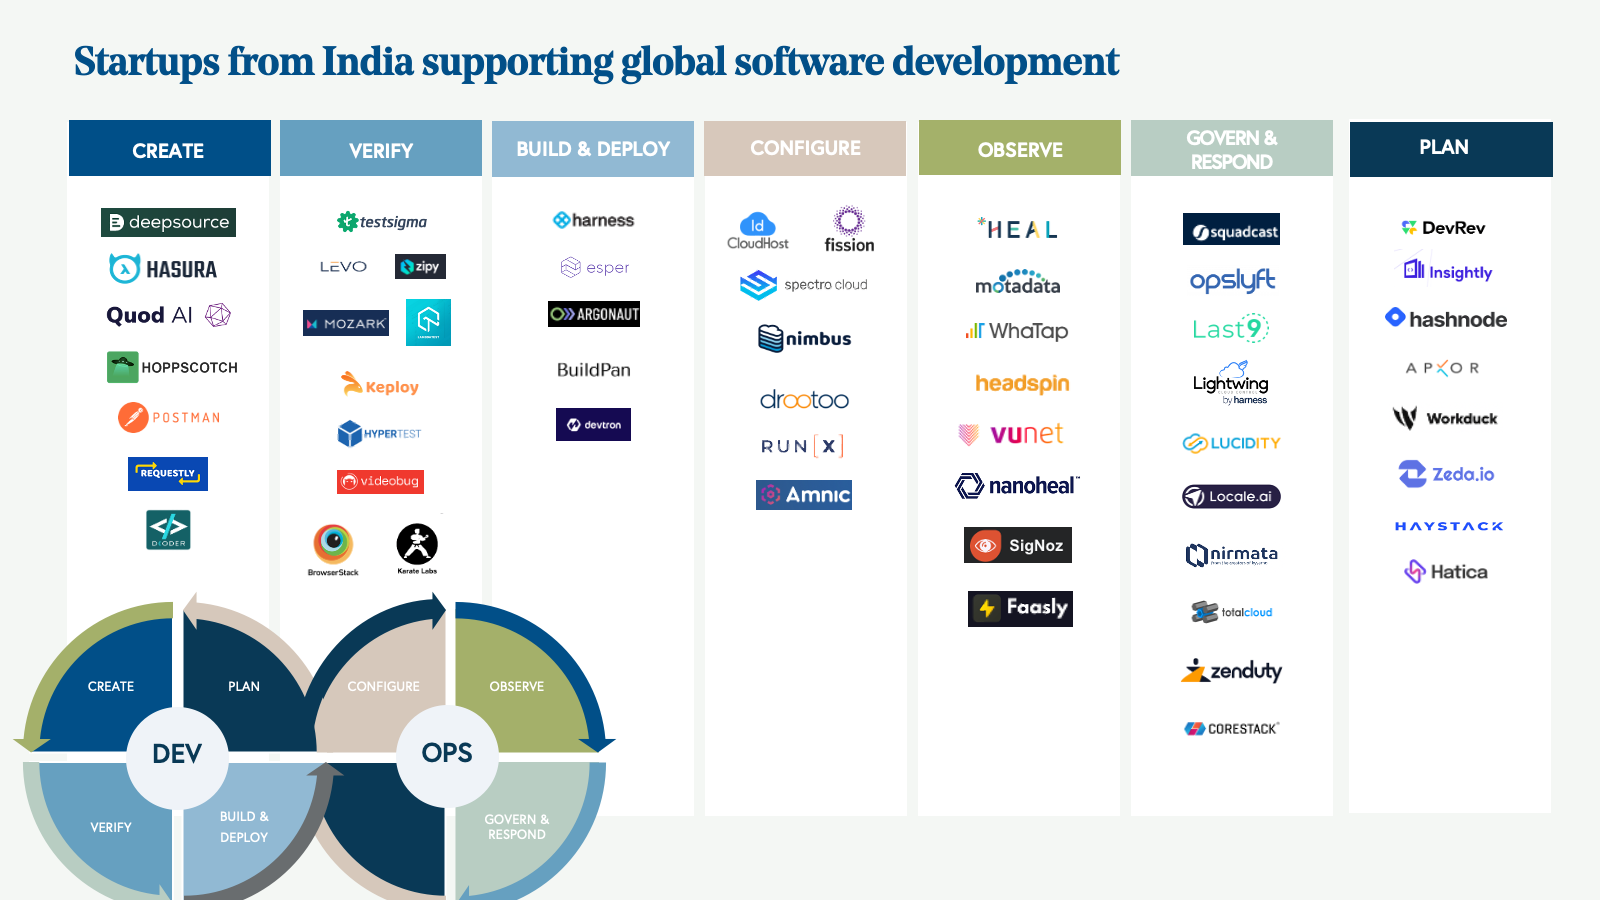 Startups from India supporting global software development